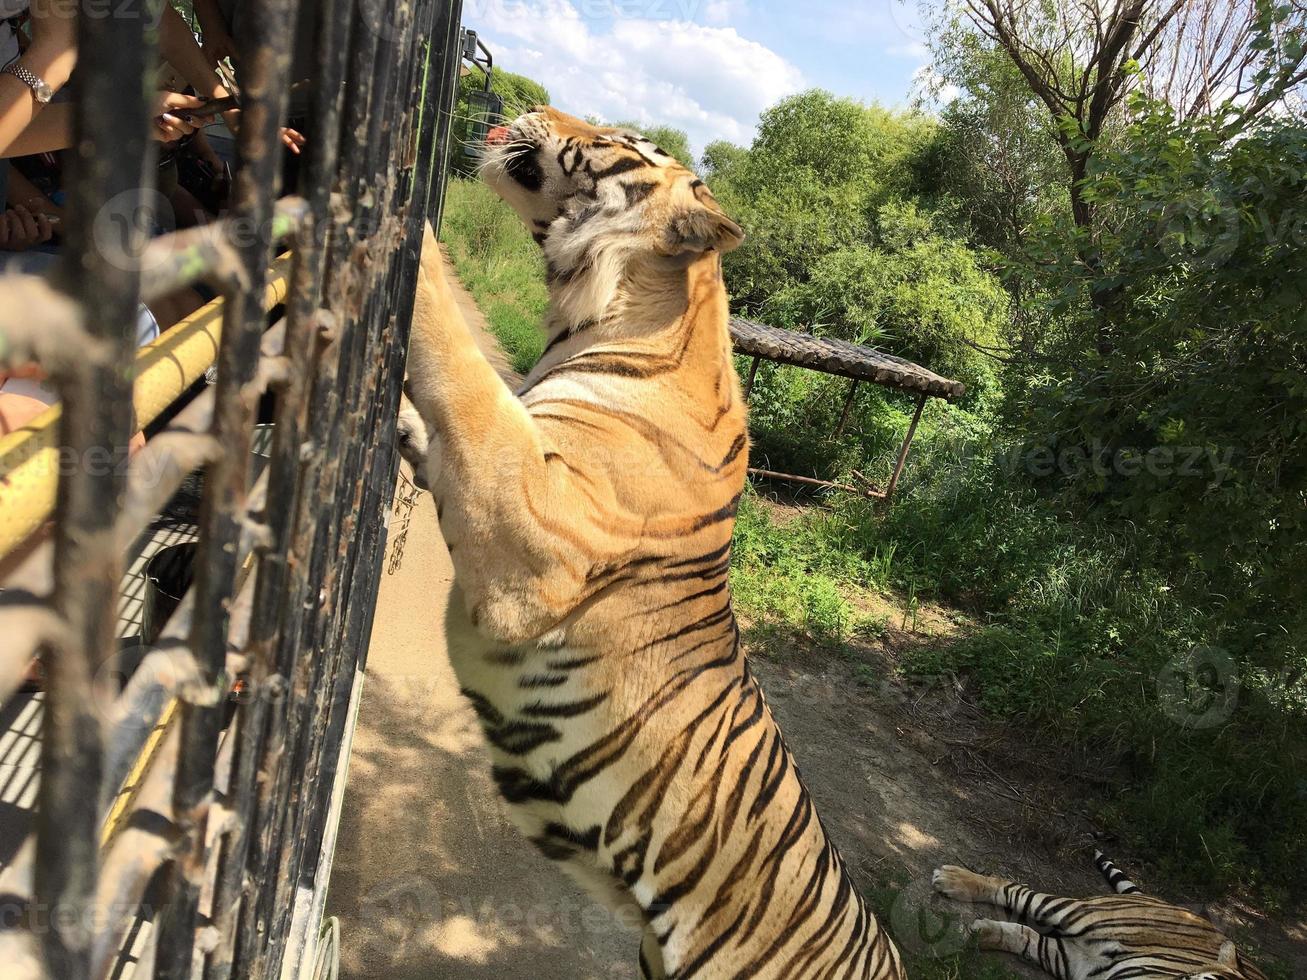 a tiger is climbing the fence to see visitors inside the zoo photo